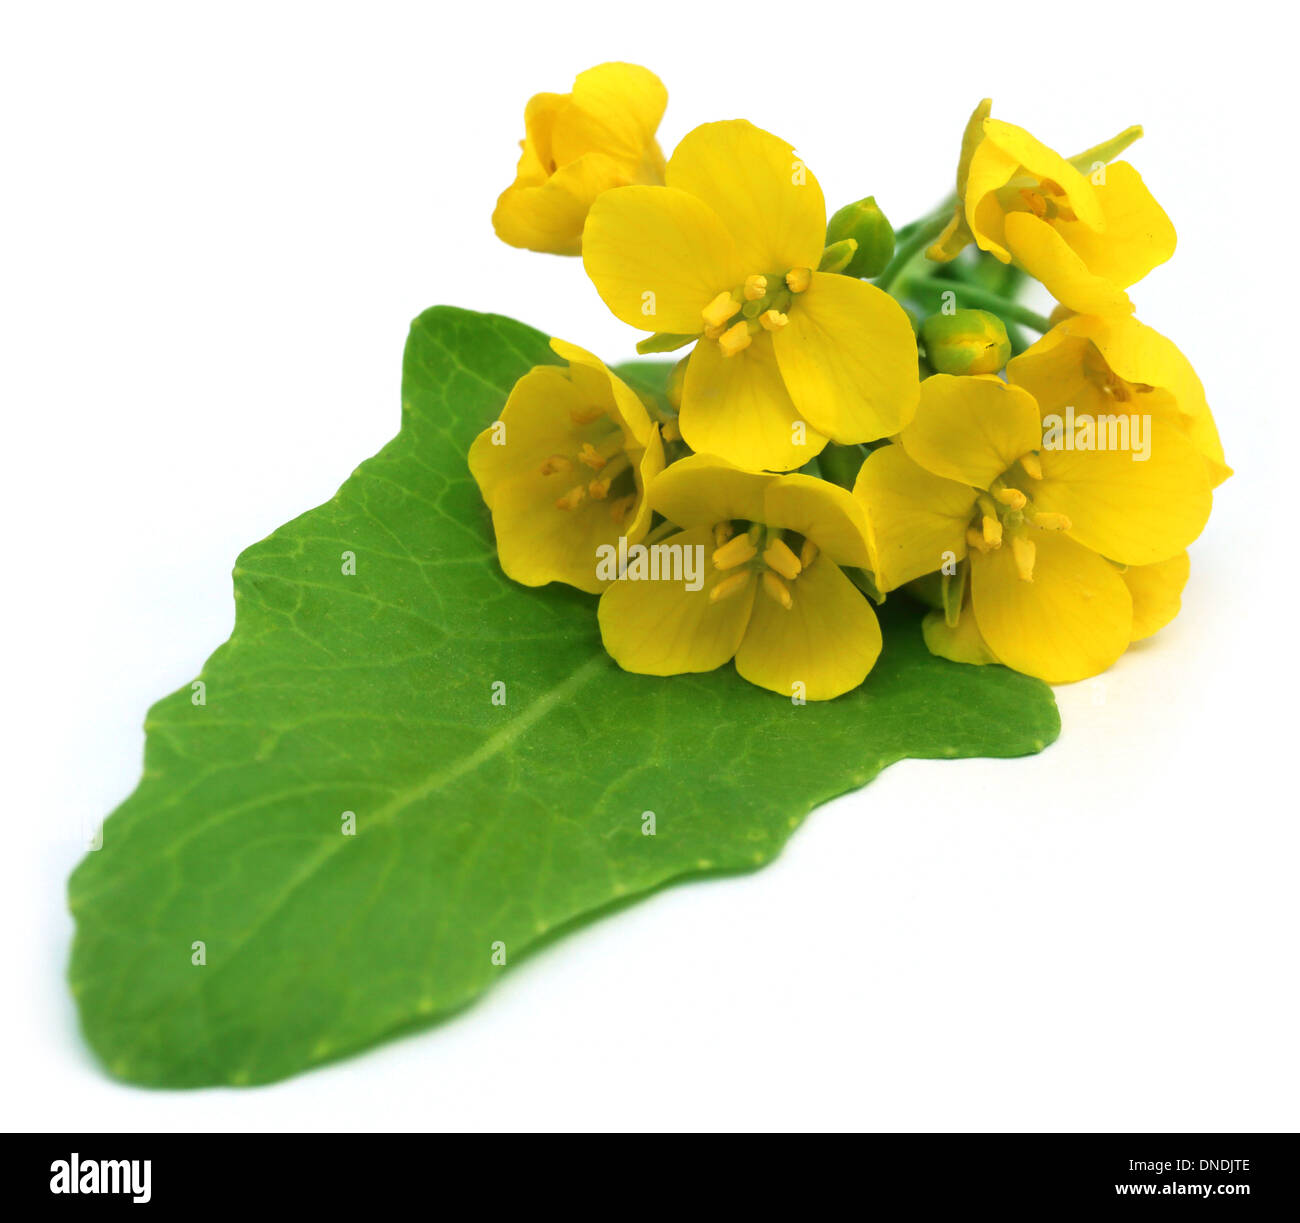 Bunch of edible mustard flowers with green leaf Stock Photo